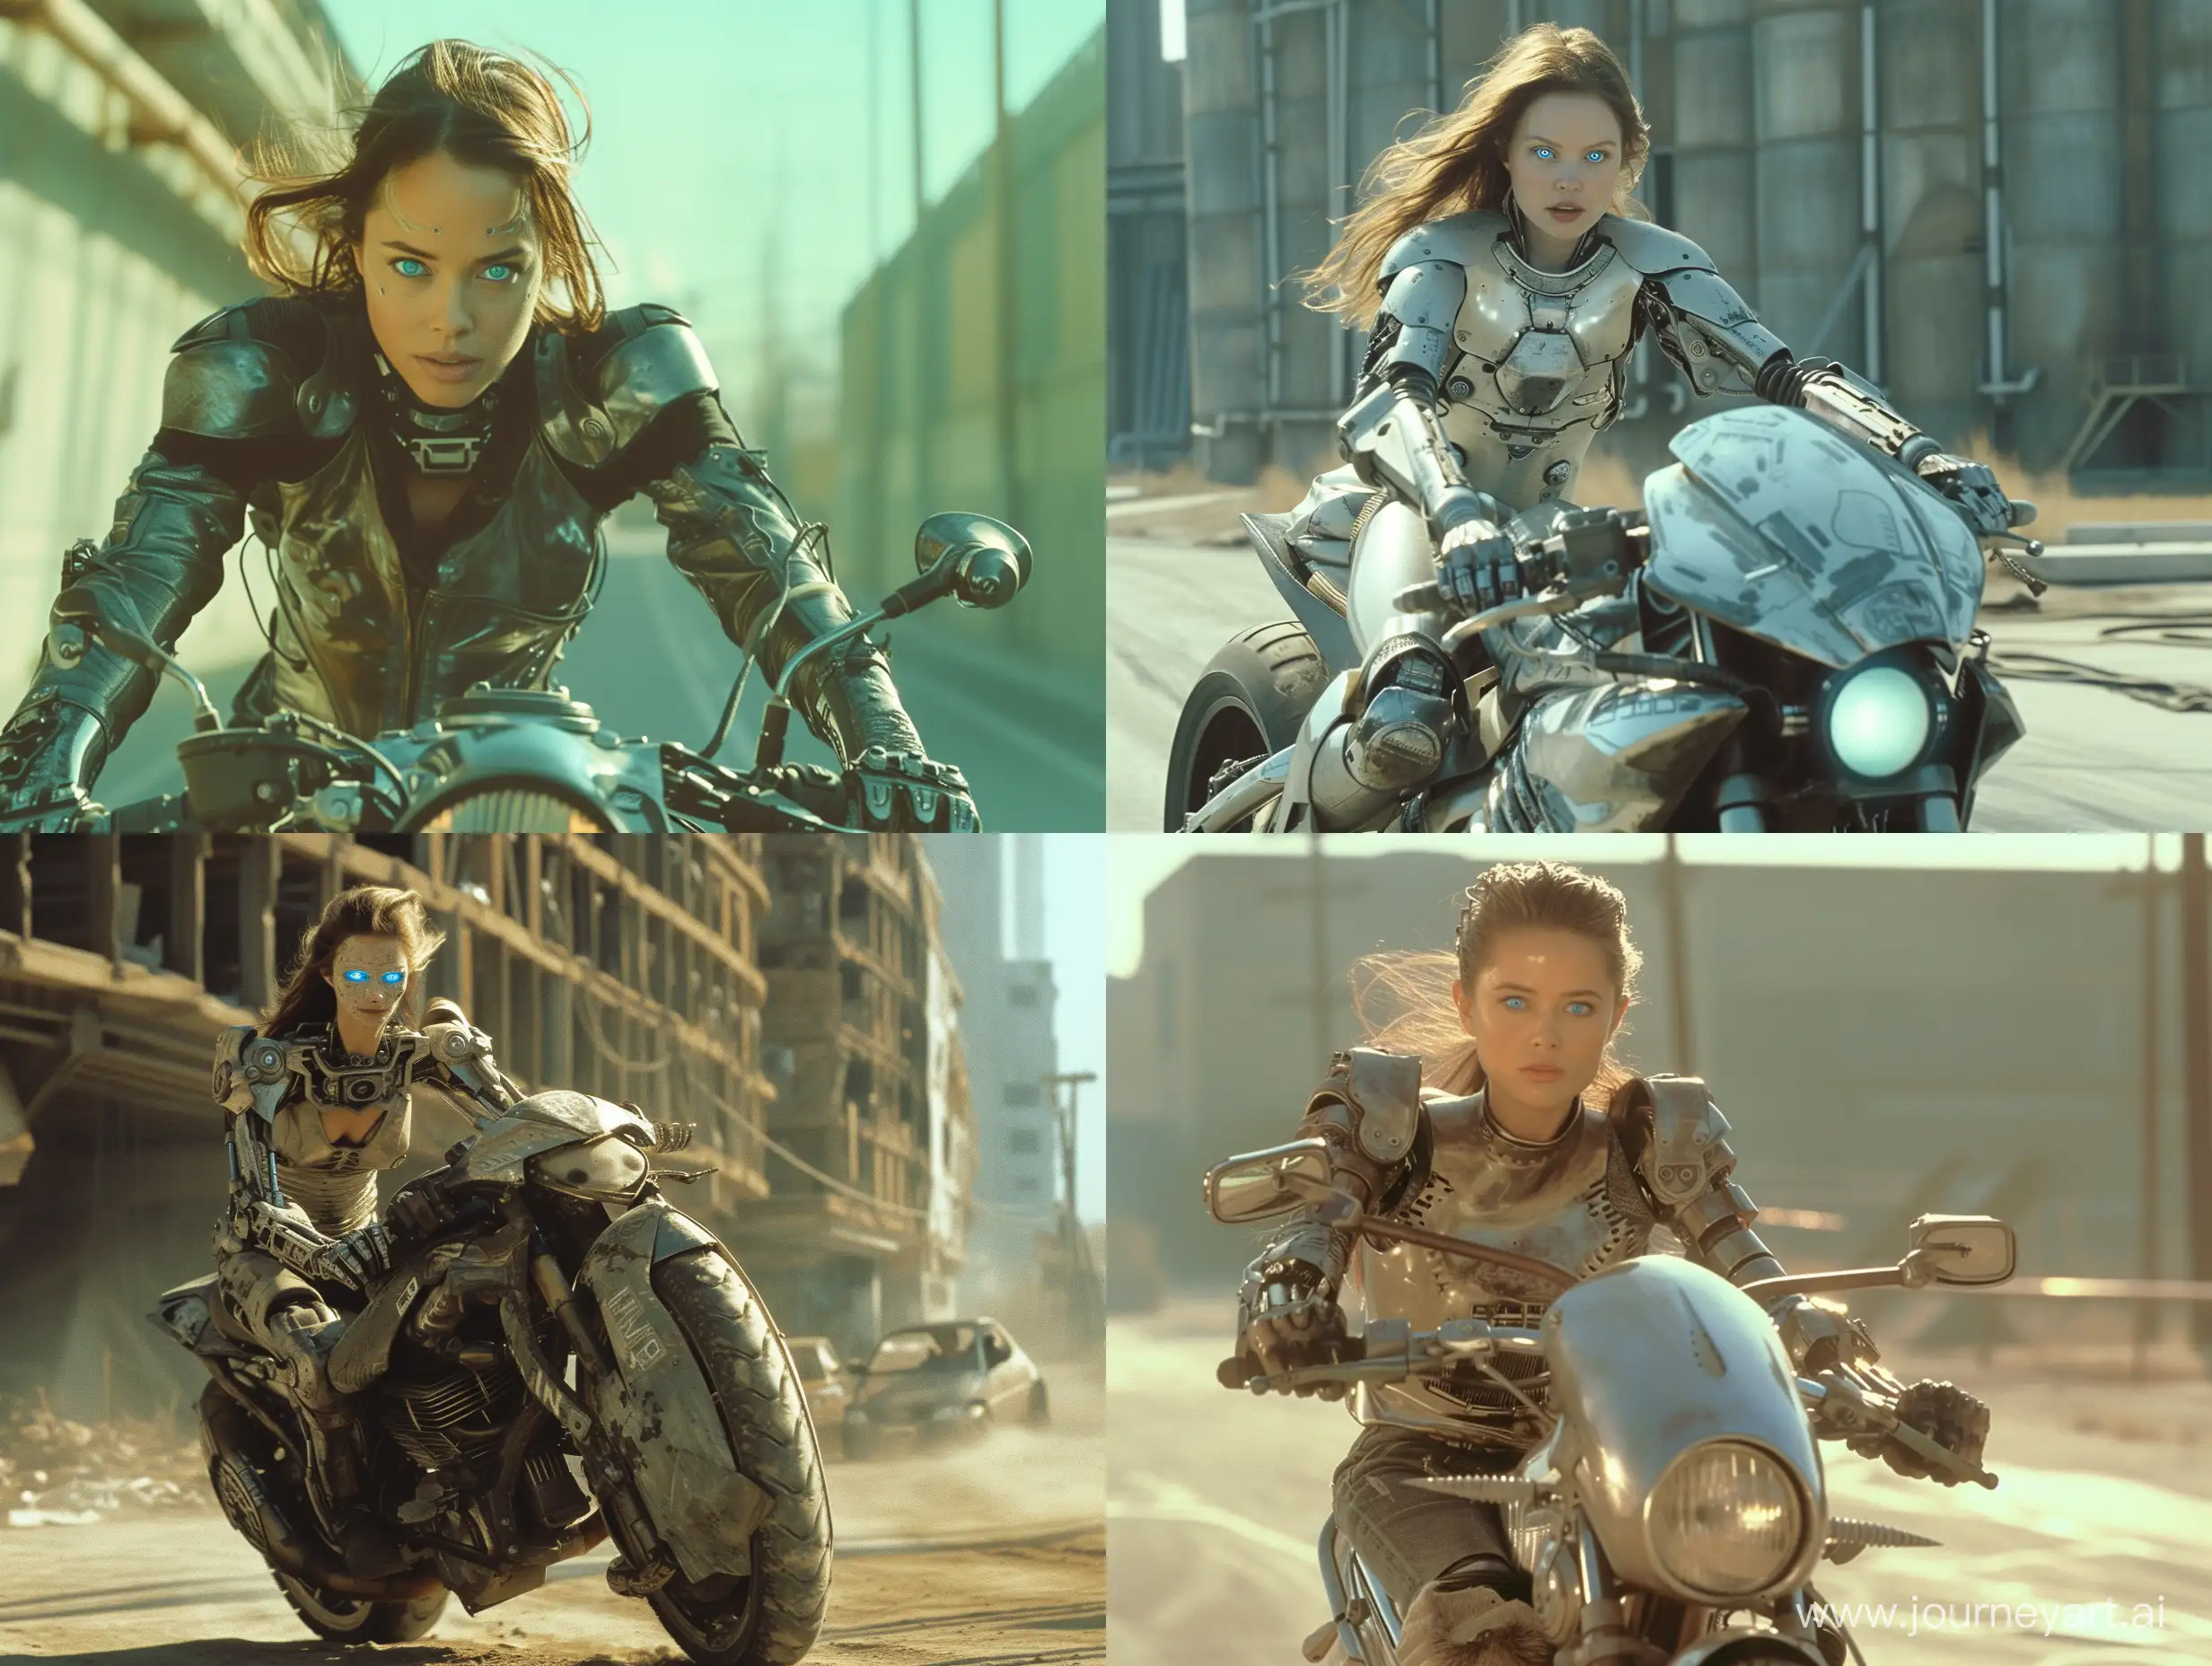 a old 2000s sci fi movie still of a  cyborg woman riding on her motorcycle, nostalgia, blue eyes, open area, full body, outside city environment, dystopian,
